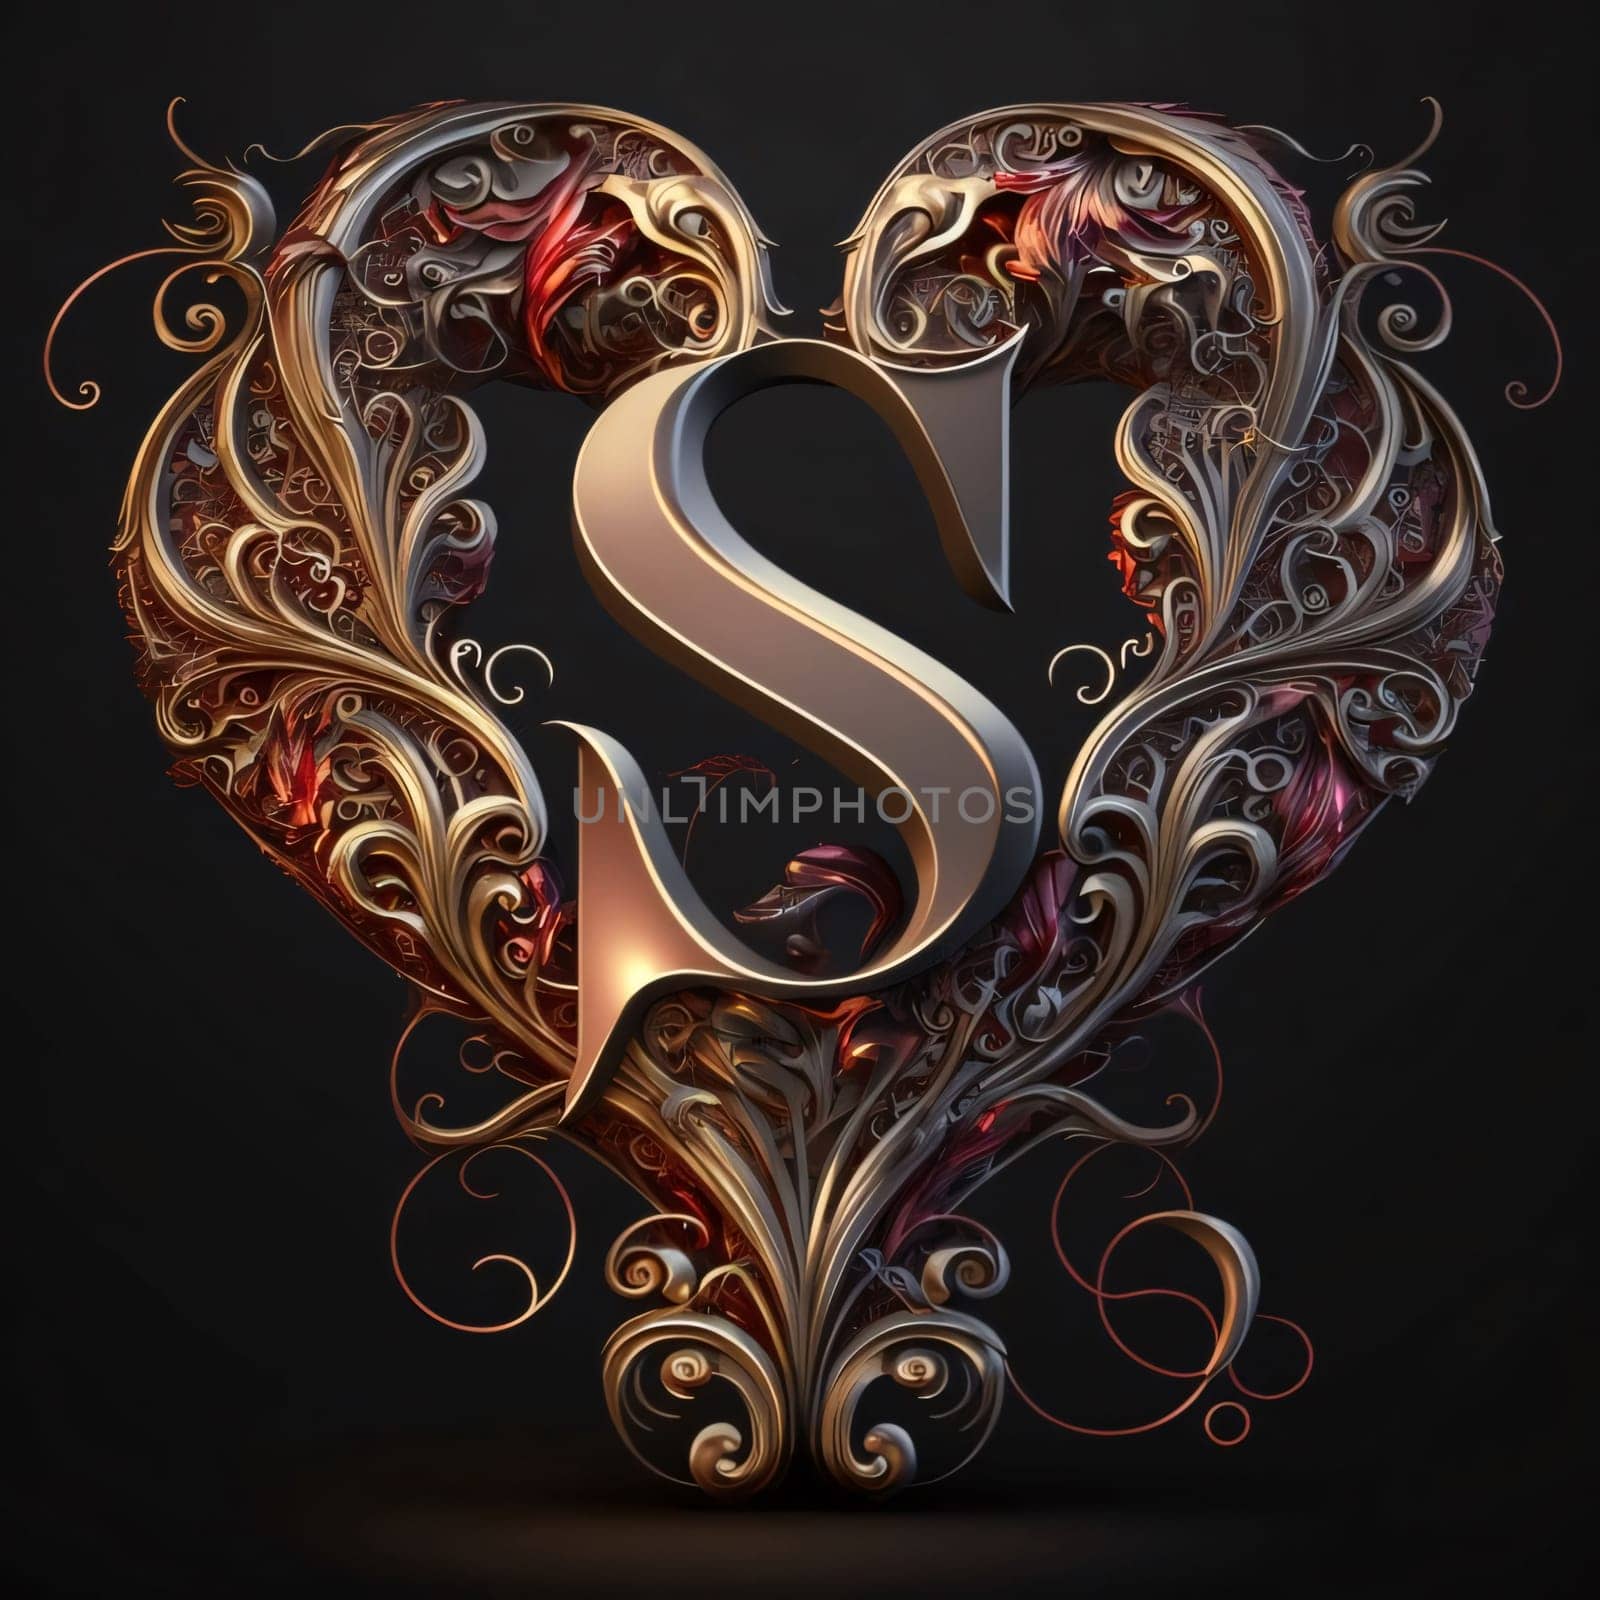 3D illustration, 3D rendering, letter S in the form of a heart with ornament by ThemesS